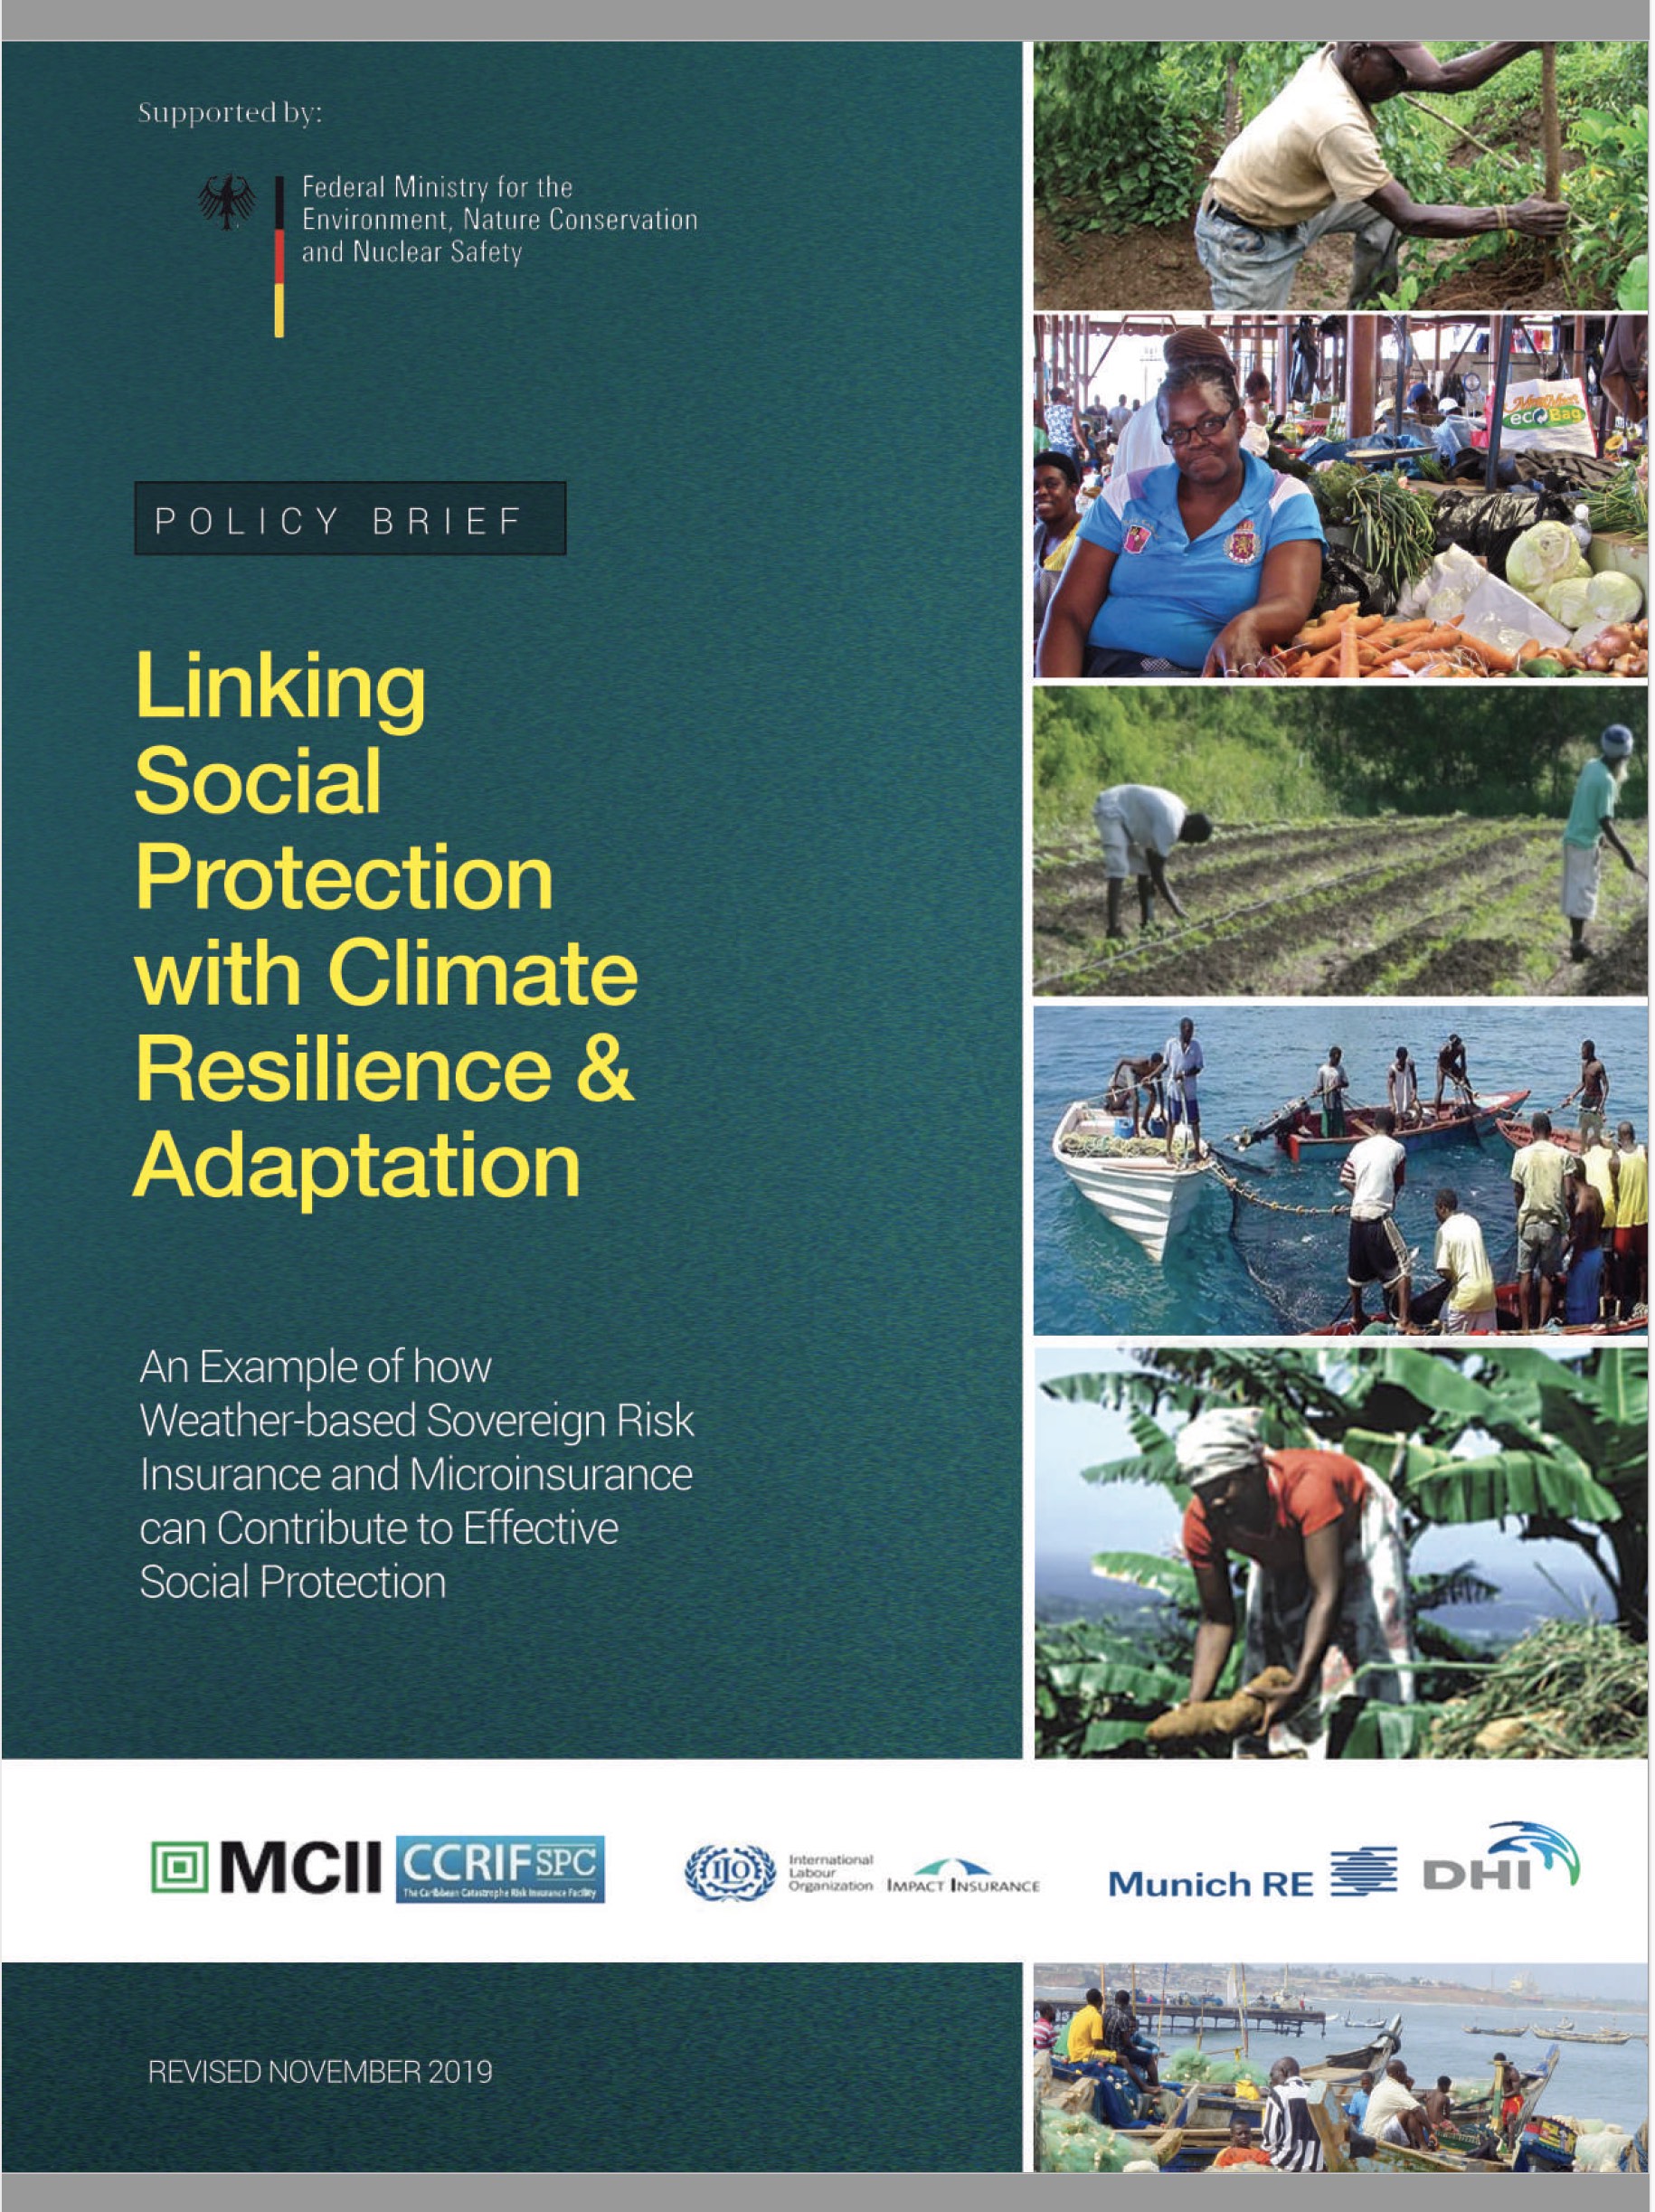 Policy Brief - Linking Social Protection with Climate Resilience & Adaptation